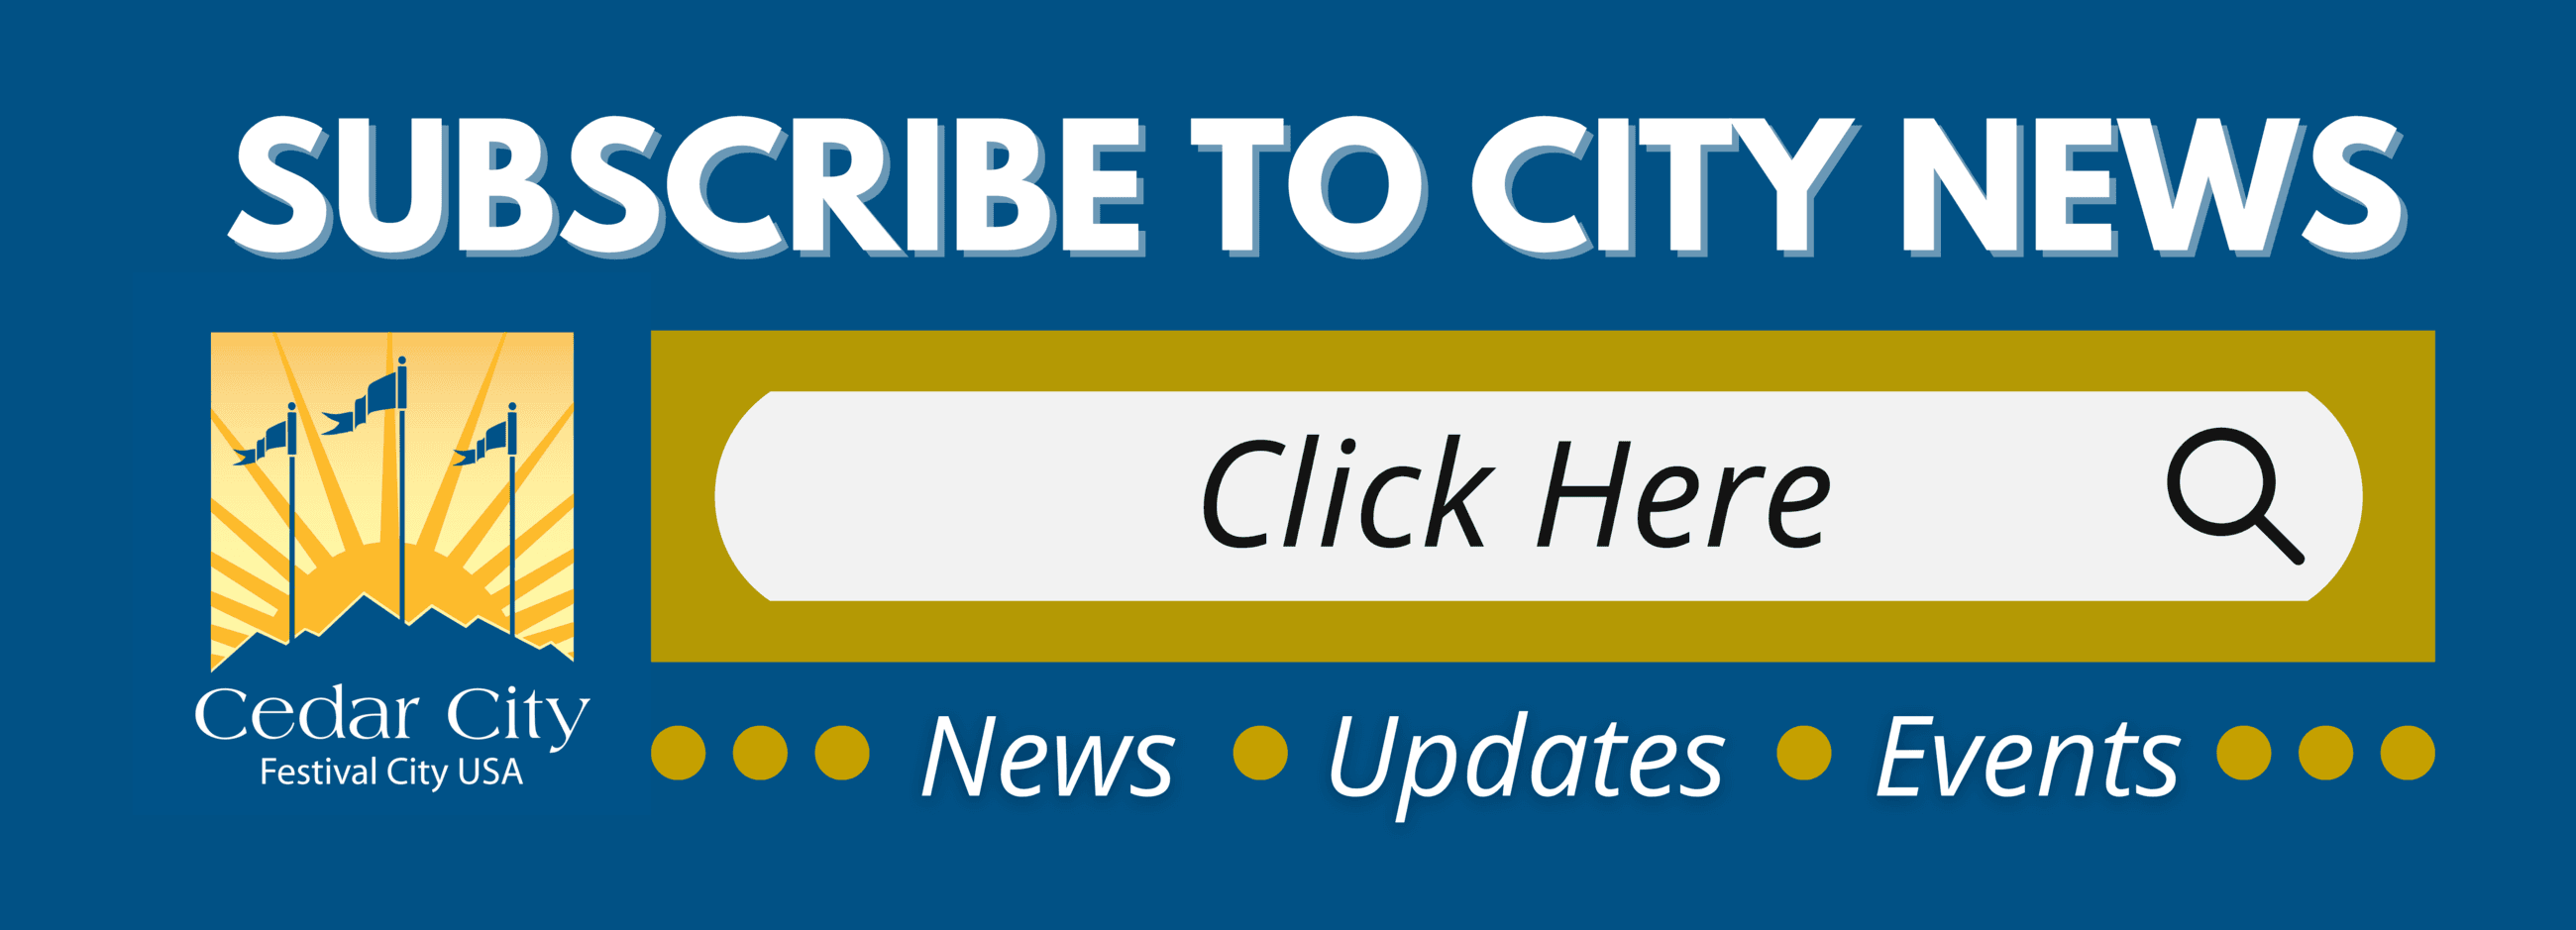 Subscribe to City News